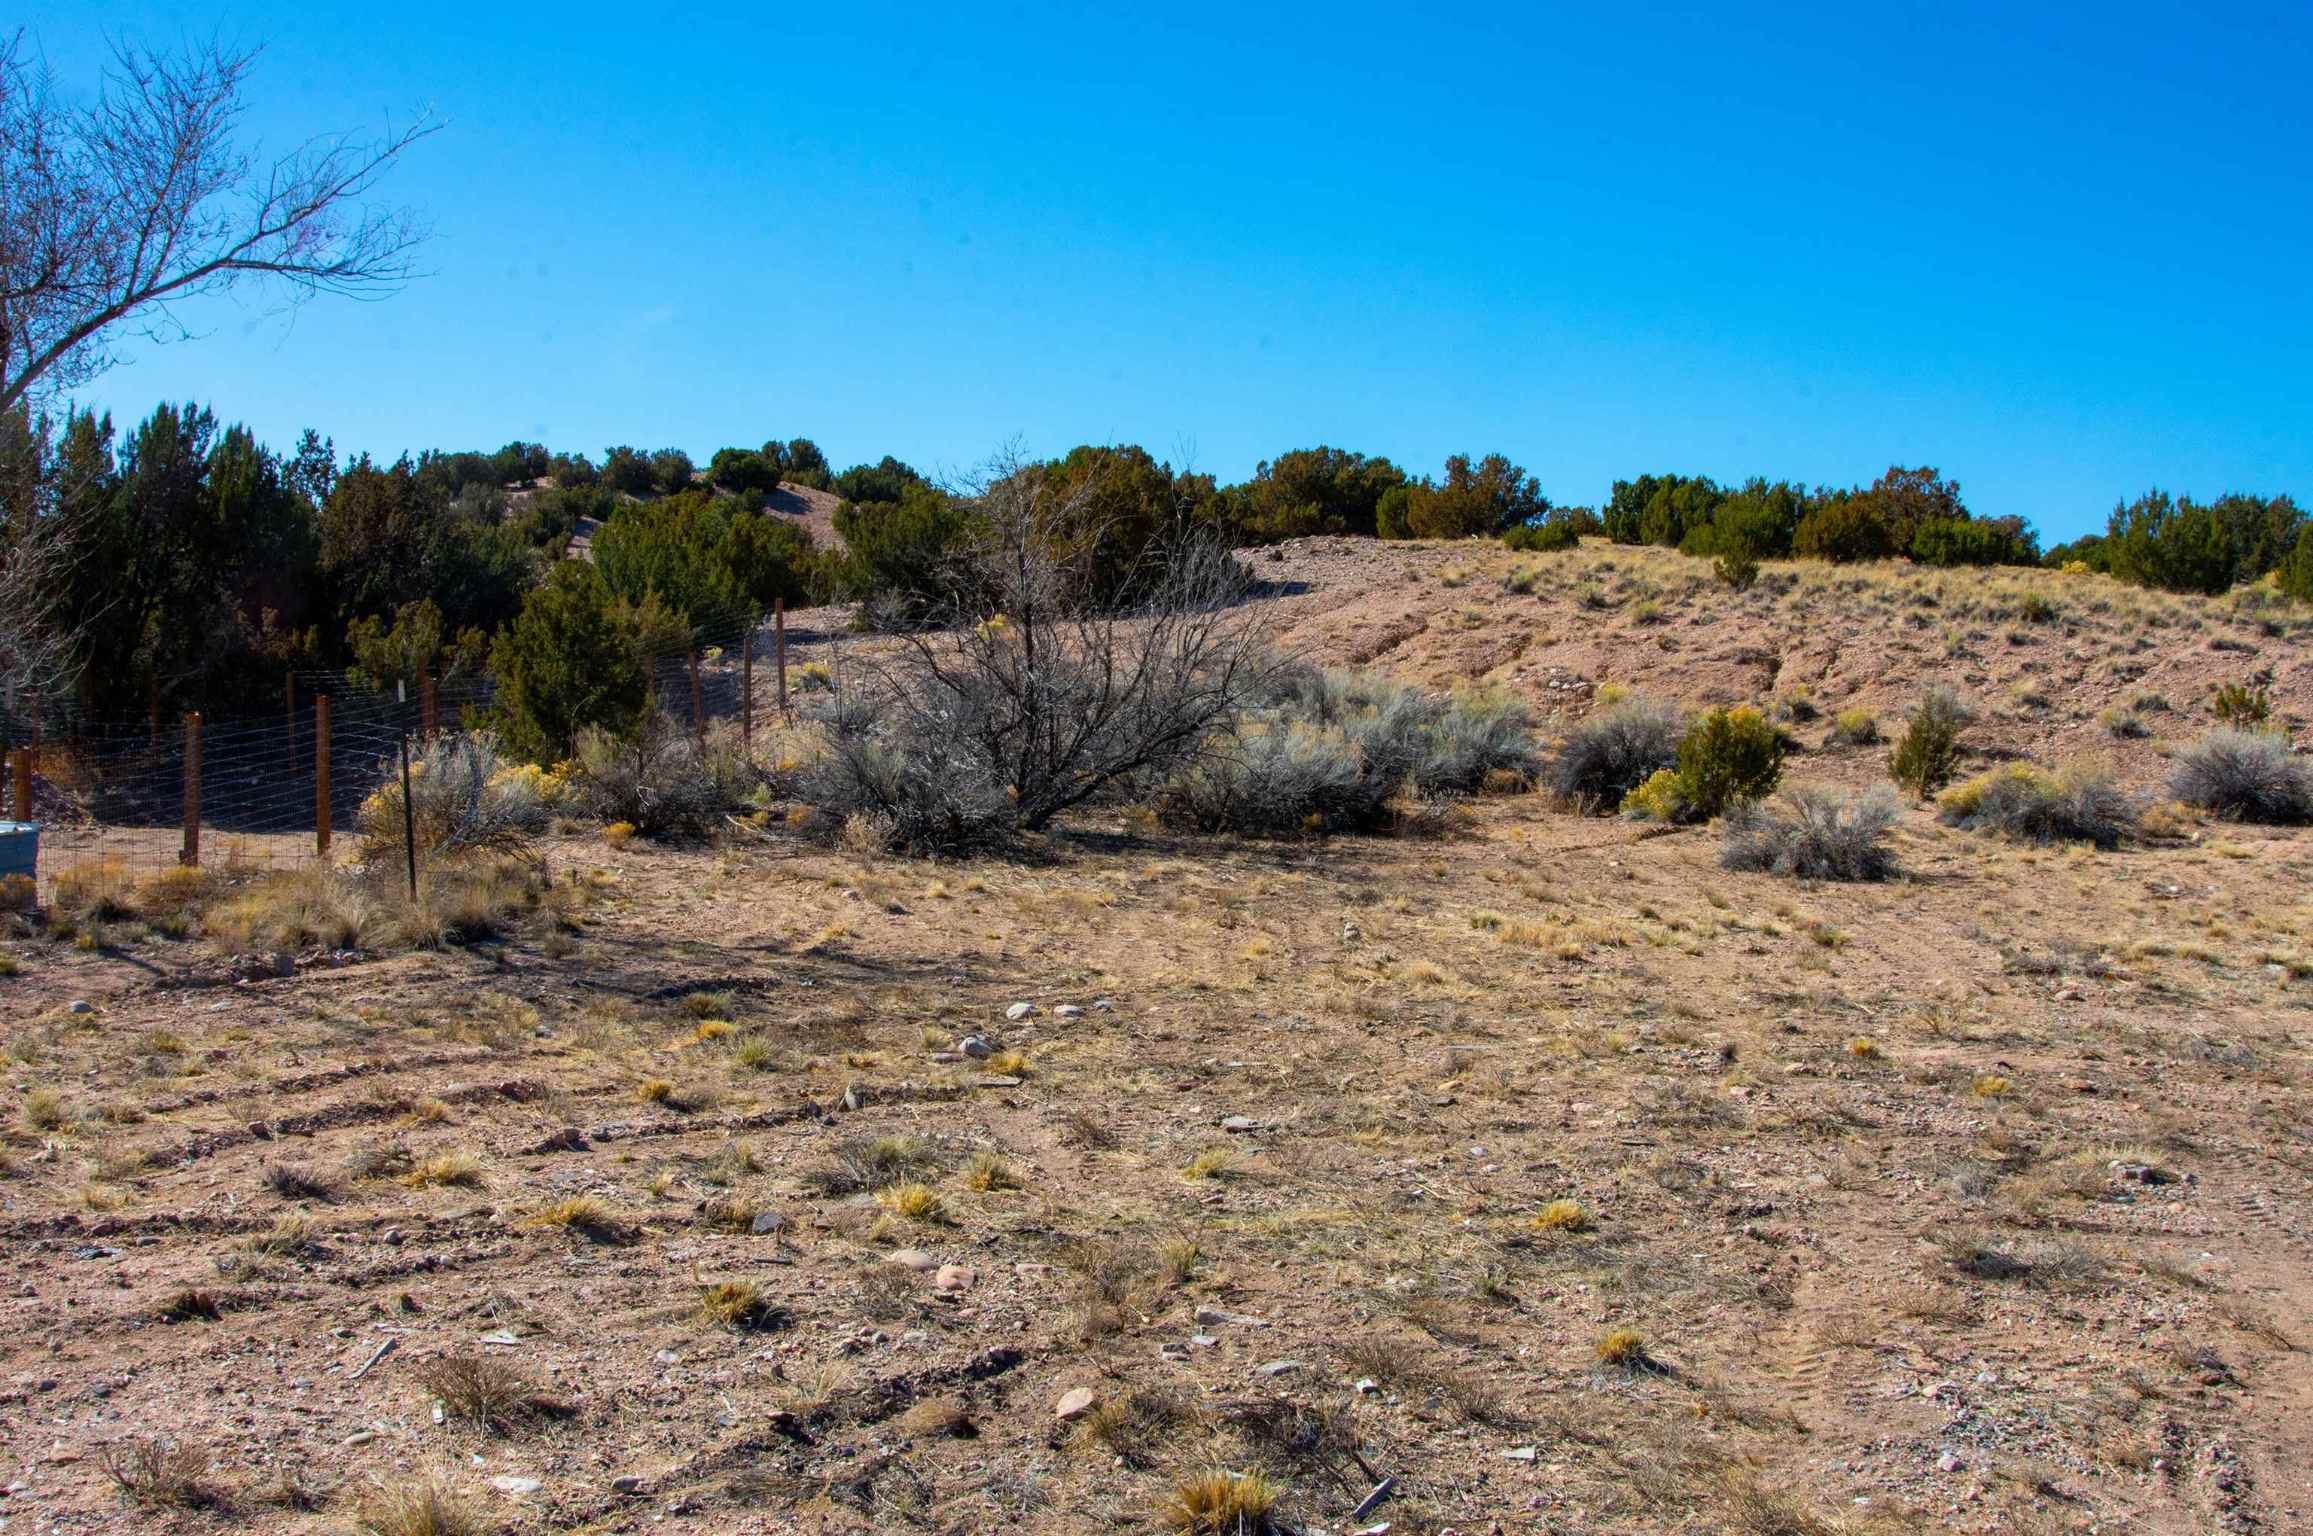 352 COUNTY RD 84, Santa Fe, New Mexico 87506, 2 Bedrooms Bedrooms, ,1 BathroomBathrooms,Residential,For Sale,352 COUNTY RD 84,202201120